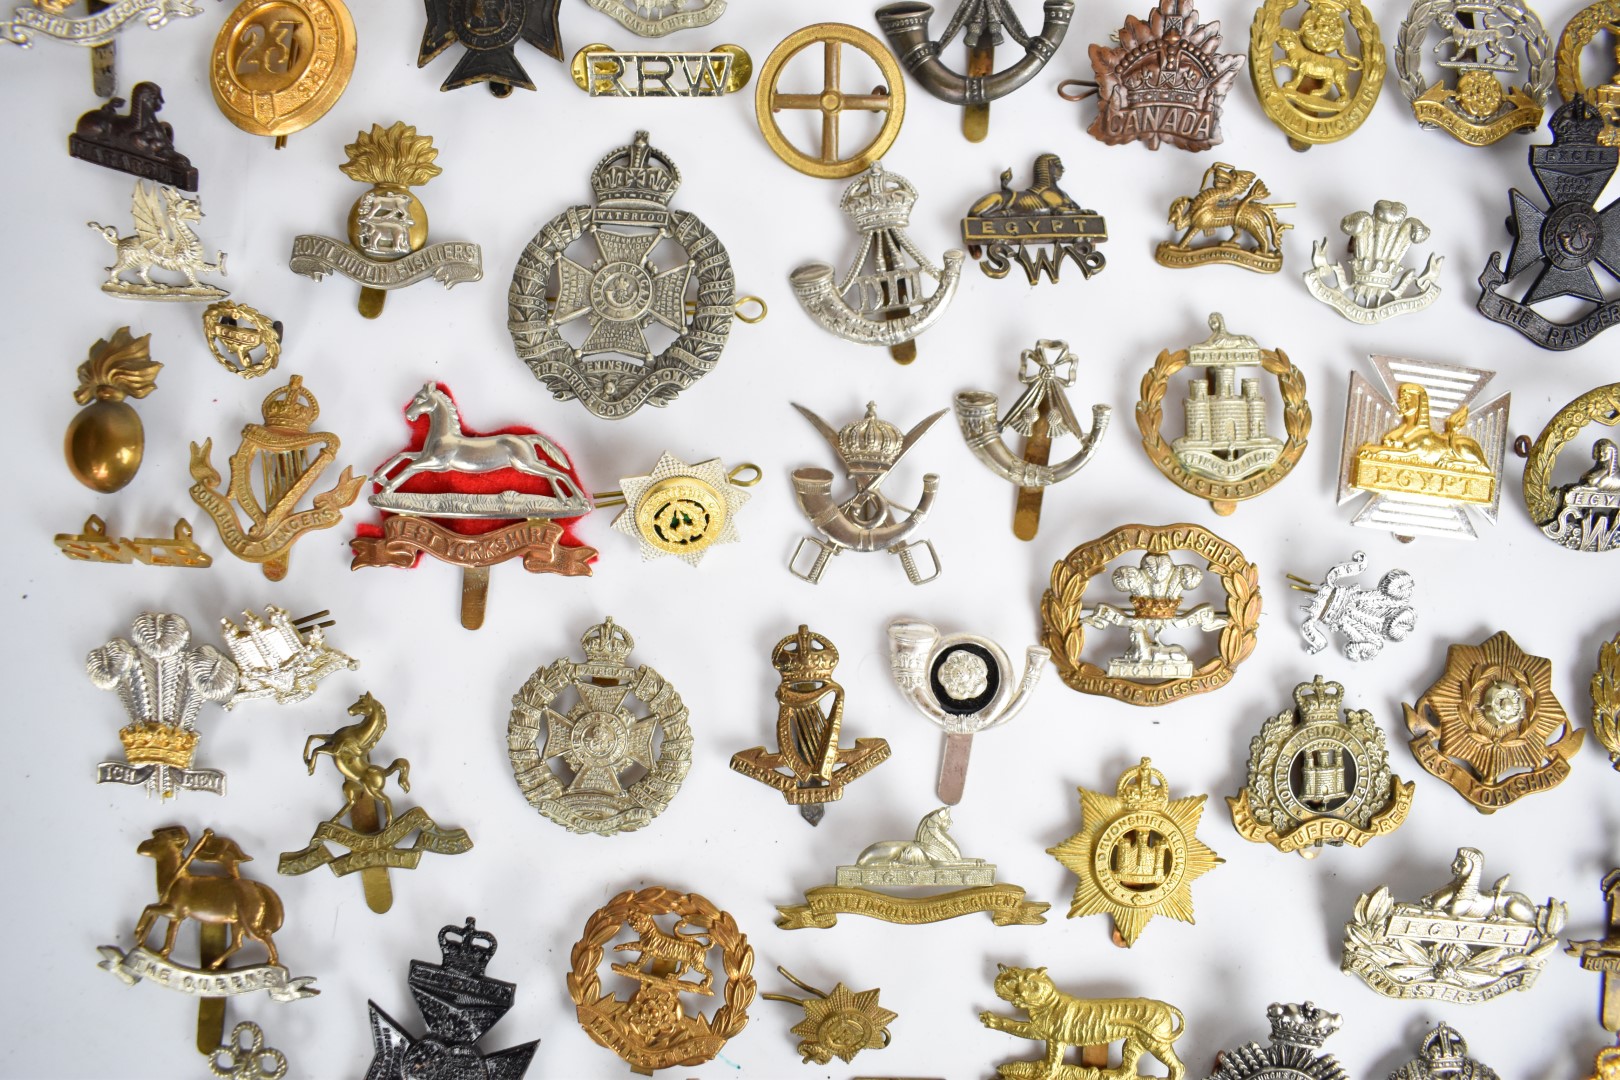 Large collection of approximately 100 British Army cap badges including Royal Sussex Regiment, - Image 12 of 14